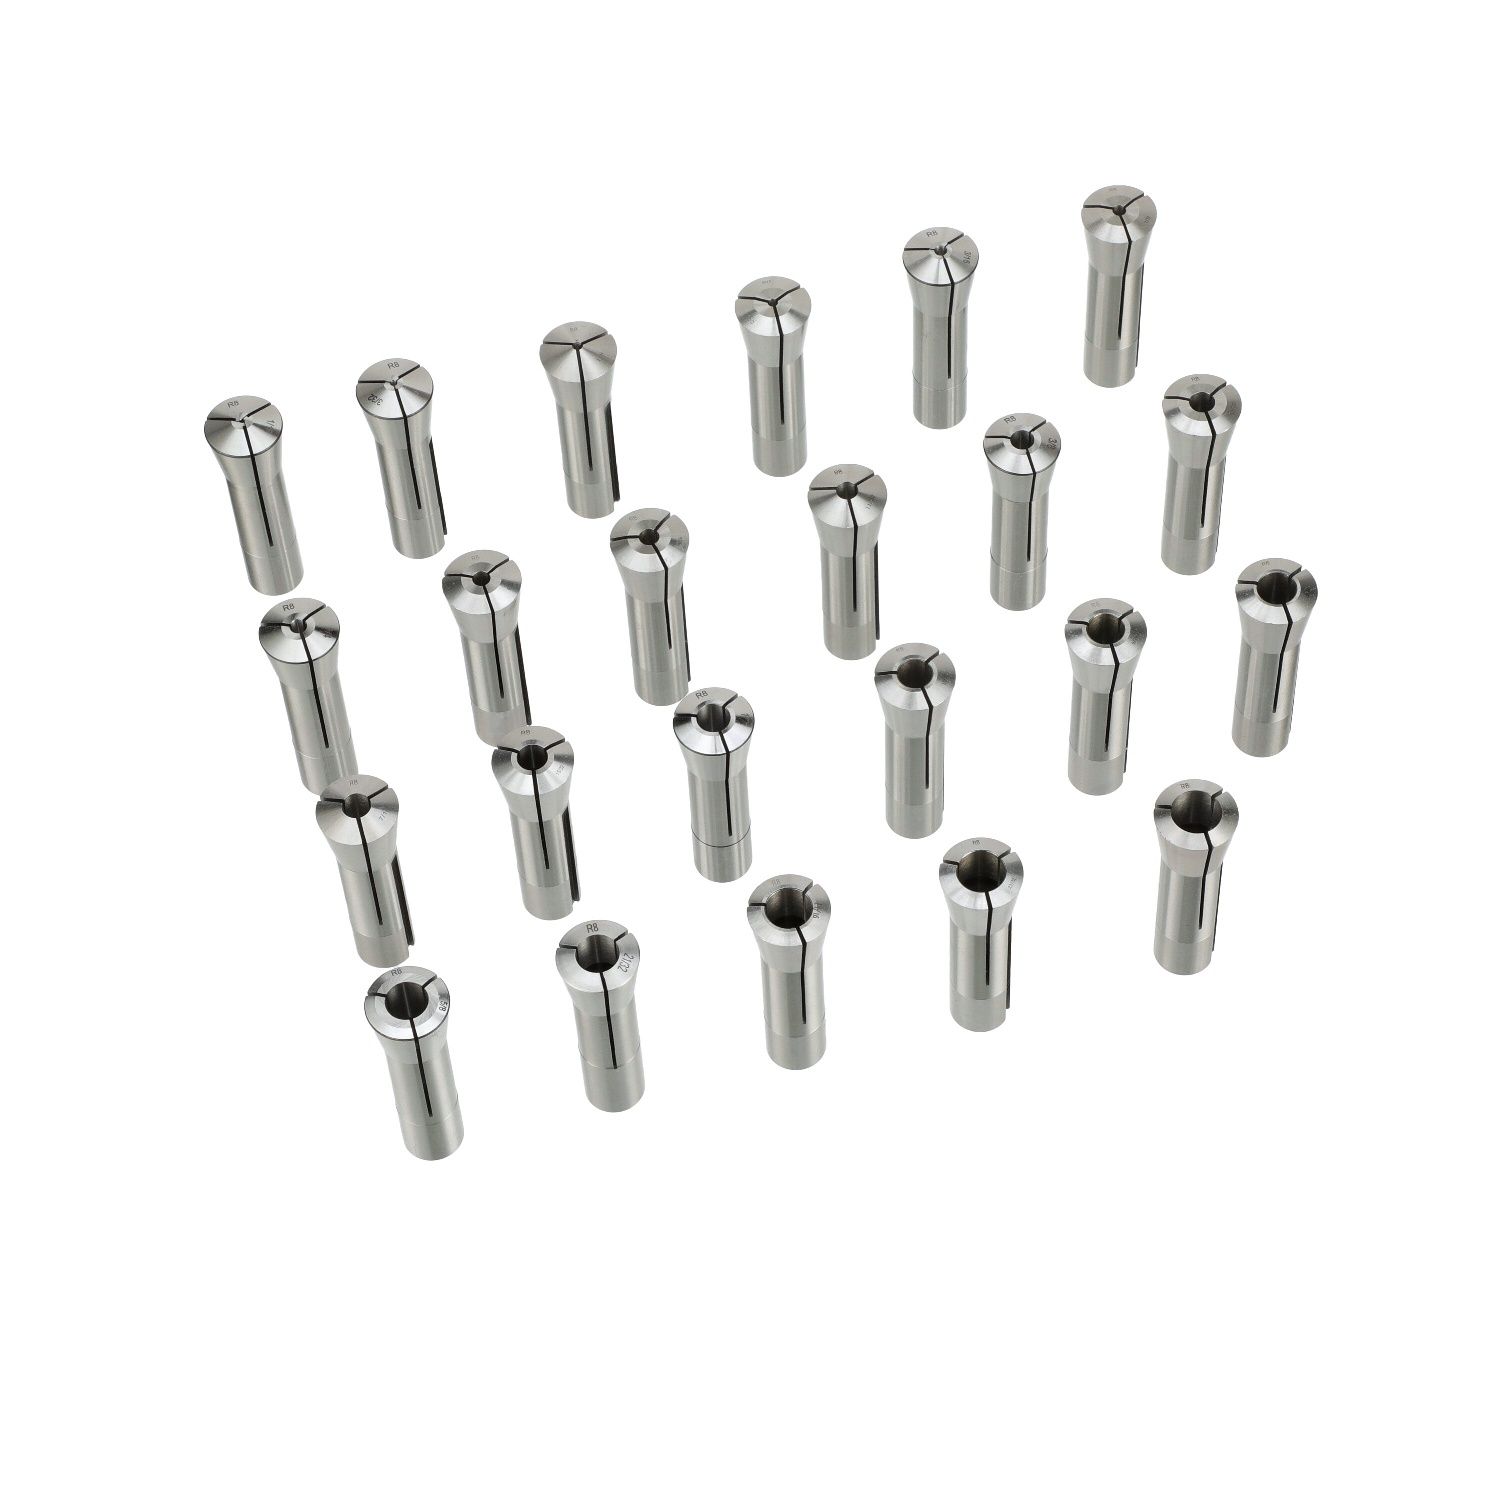 1/16-3/4" BY 32NDS 23 PIECE R8 COLLET SET (3900-0009)